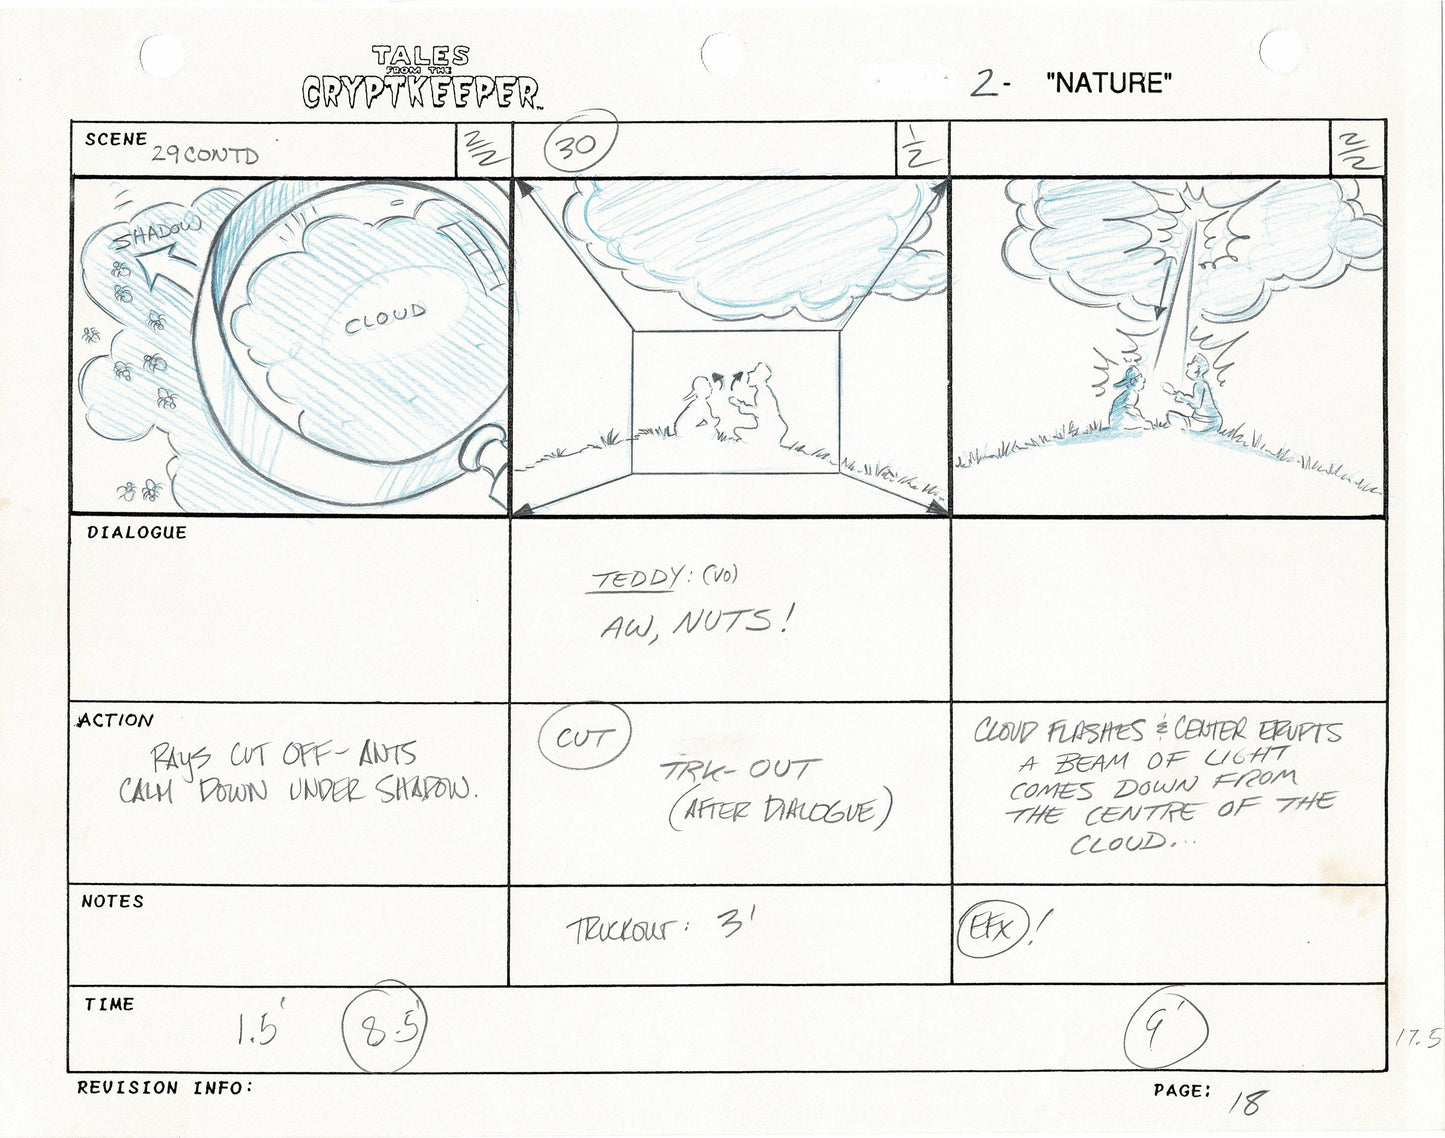 Tales From The Cryptkeeper Original Production Hand-Drawn Storyboard Nelvana 1993 Page 18